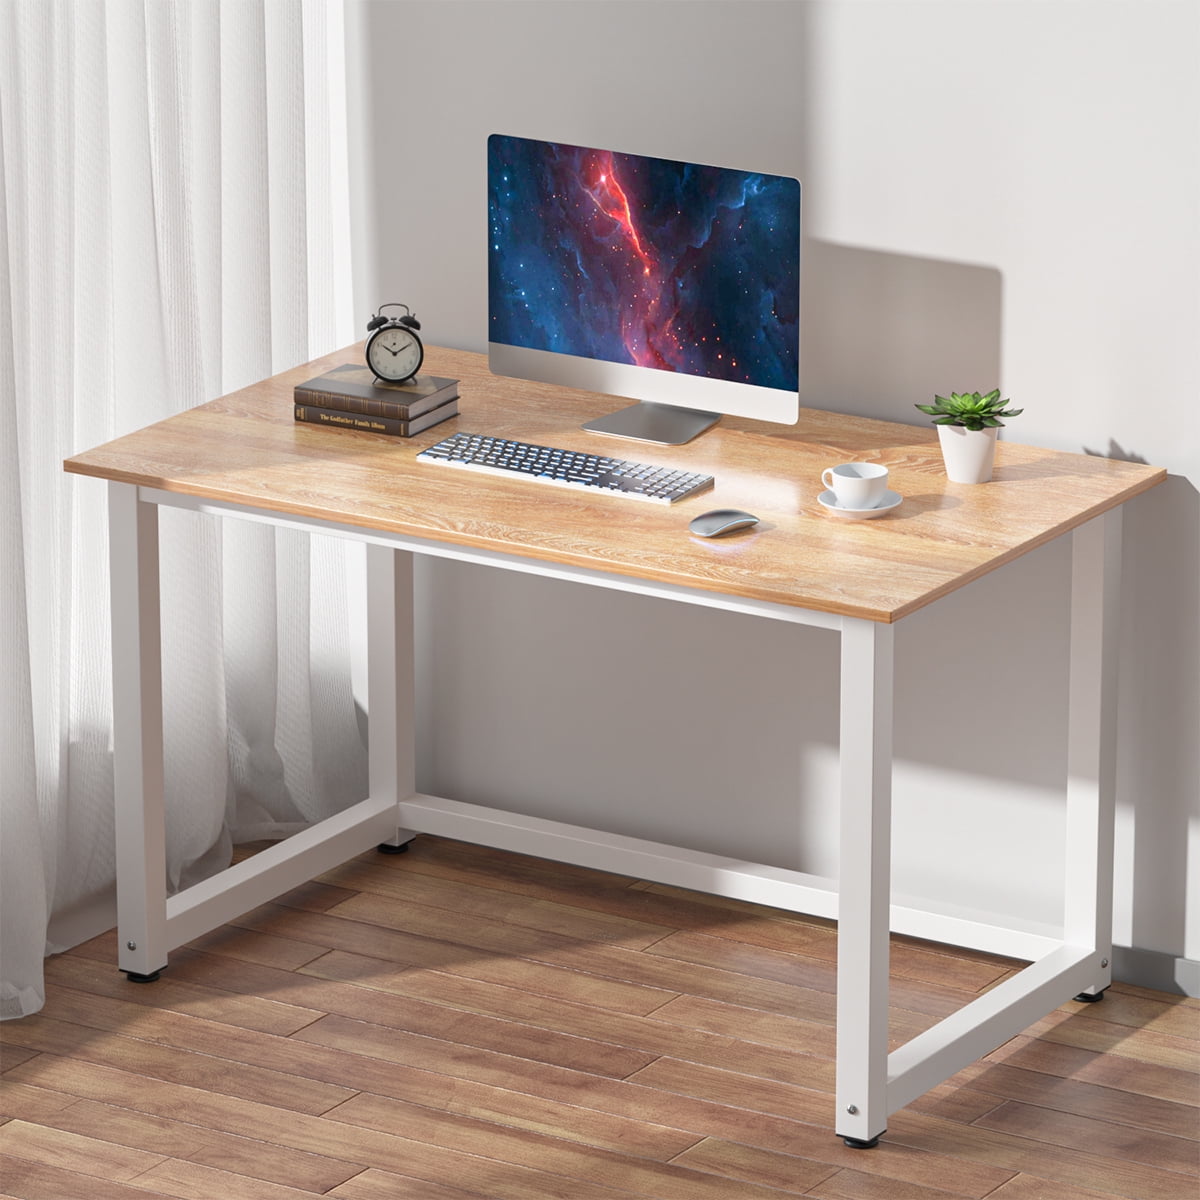 YOLENY 43inch Computer Desk with Open Storage Shelves,Modern Sturdy Writing Desk with Keyboard Tray and Monitor Shelf for Home Office 